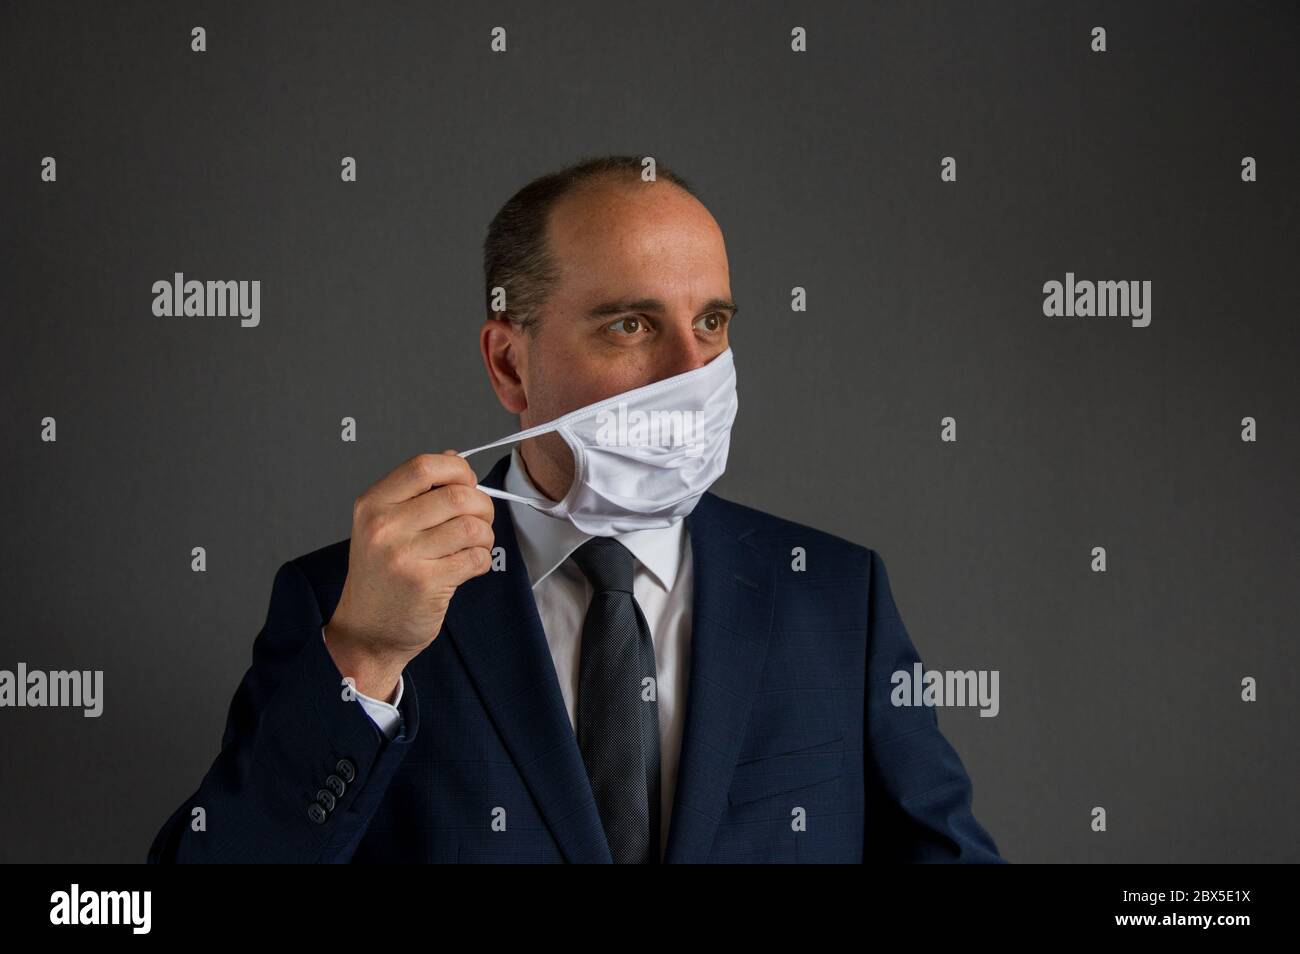 portrait of a smart dressed business man with suit and tie taking off his protective face mask looks into the distance off camera. Concept of hope for Stock Photo